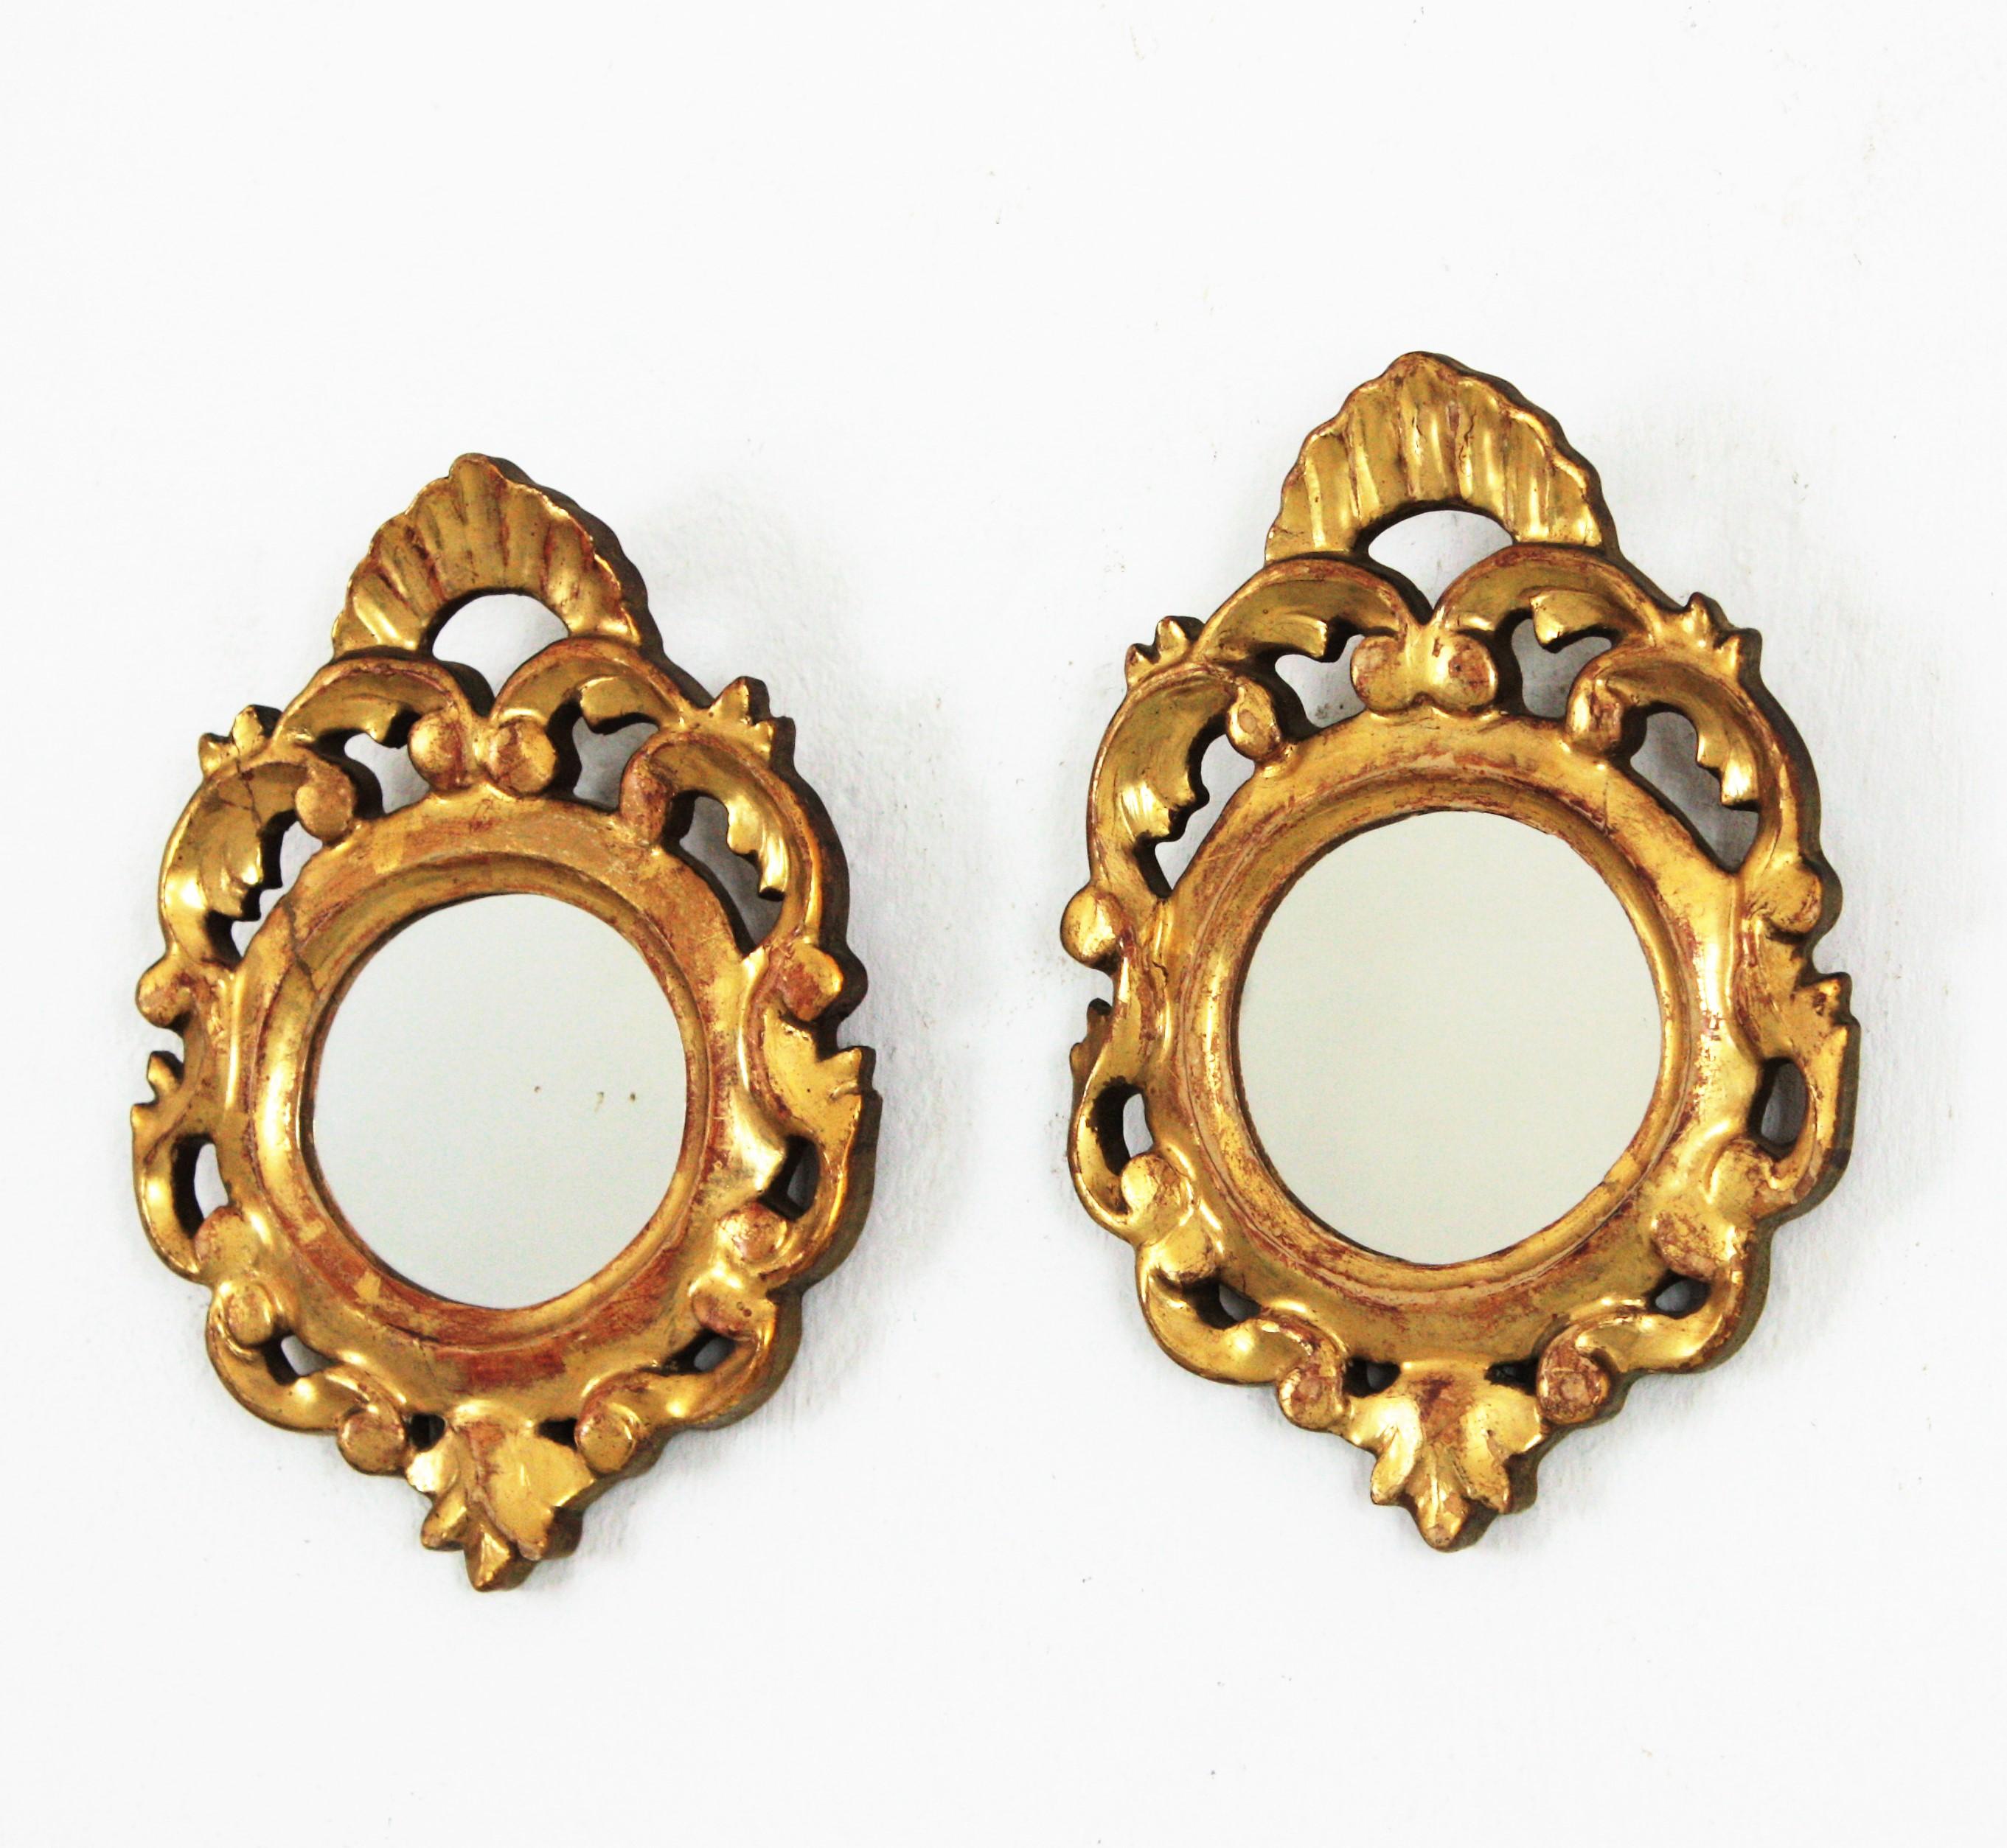 Wood Rococo Style Carved Giltwood Miniature Wall Mirrors, Pair For Sale